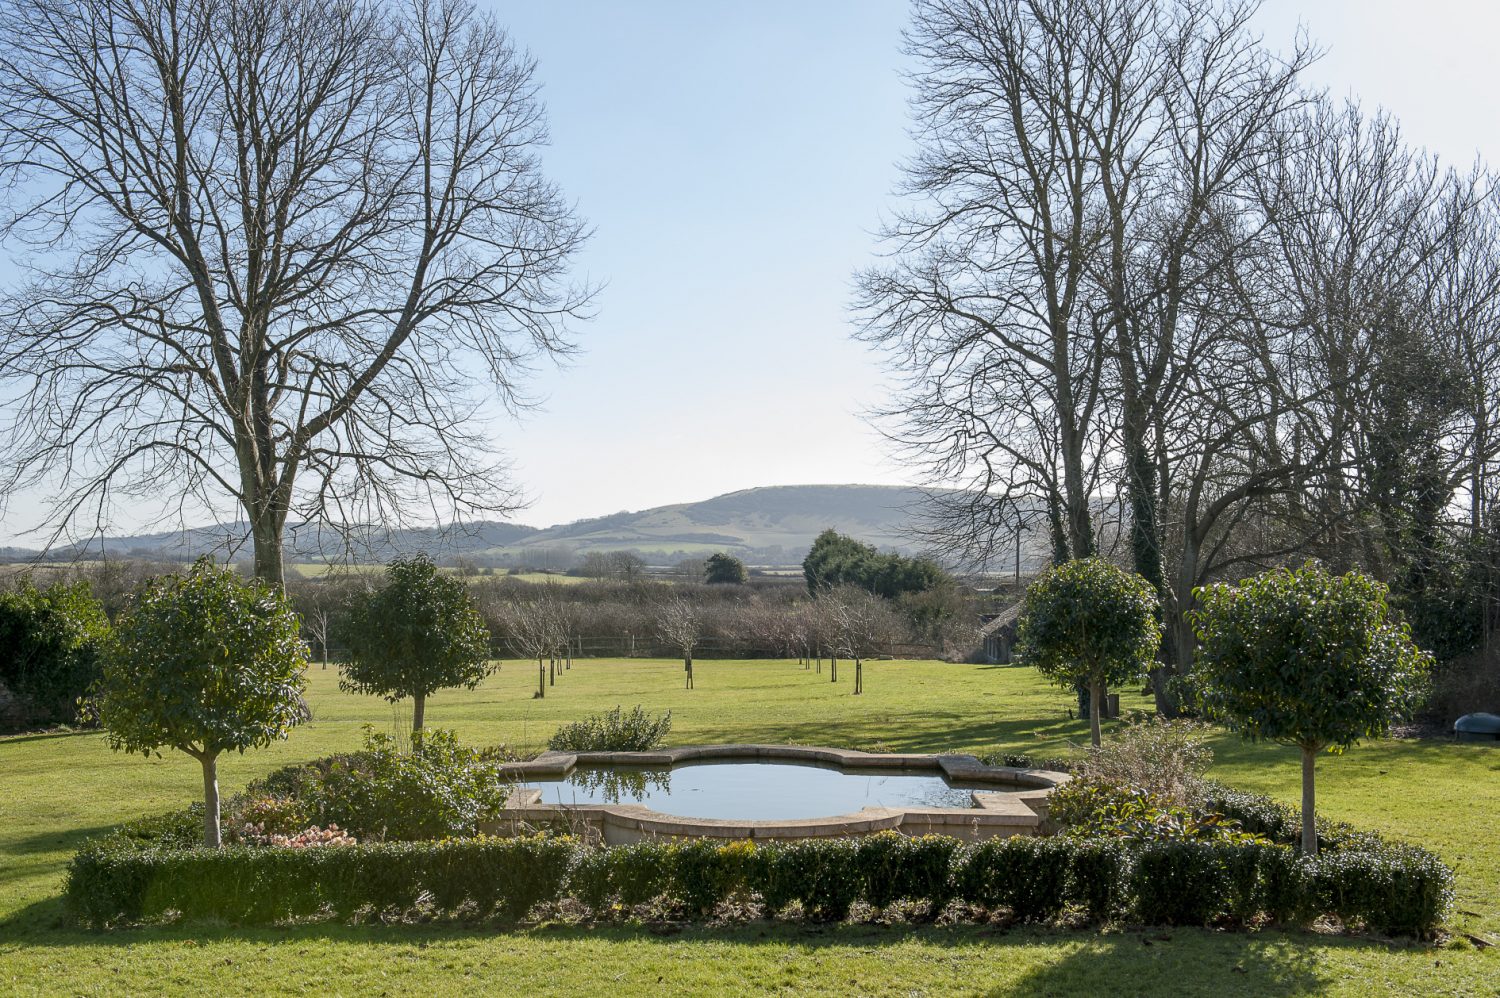 When Nina and Nick first took over the property, the garden was just a rural wasteland – a sea of mud, bramble and hawthorn. Over the years, like the house itself, the couple have painstakingly returned it to its former glory